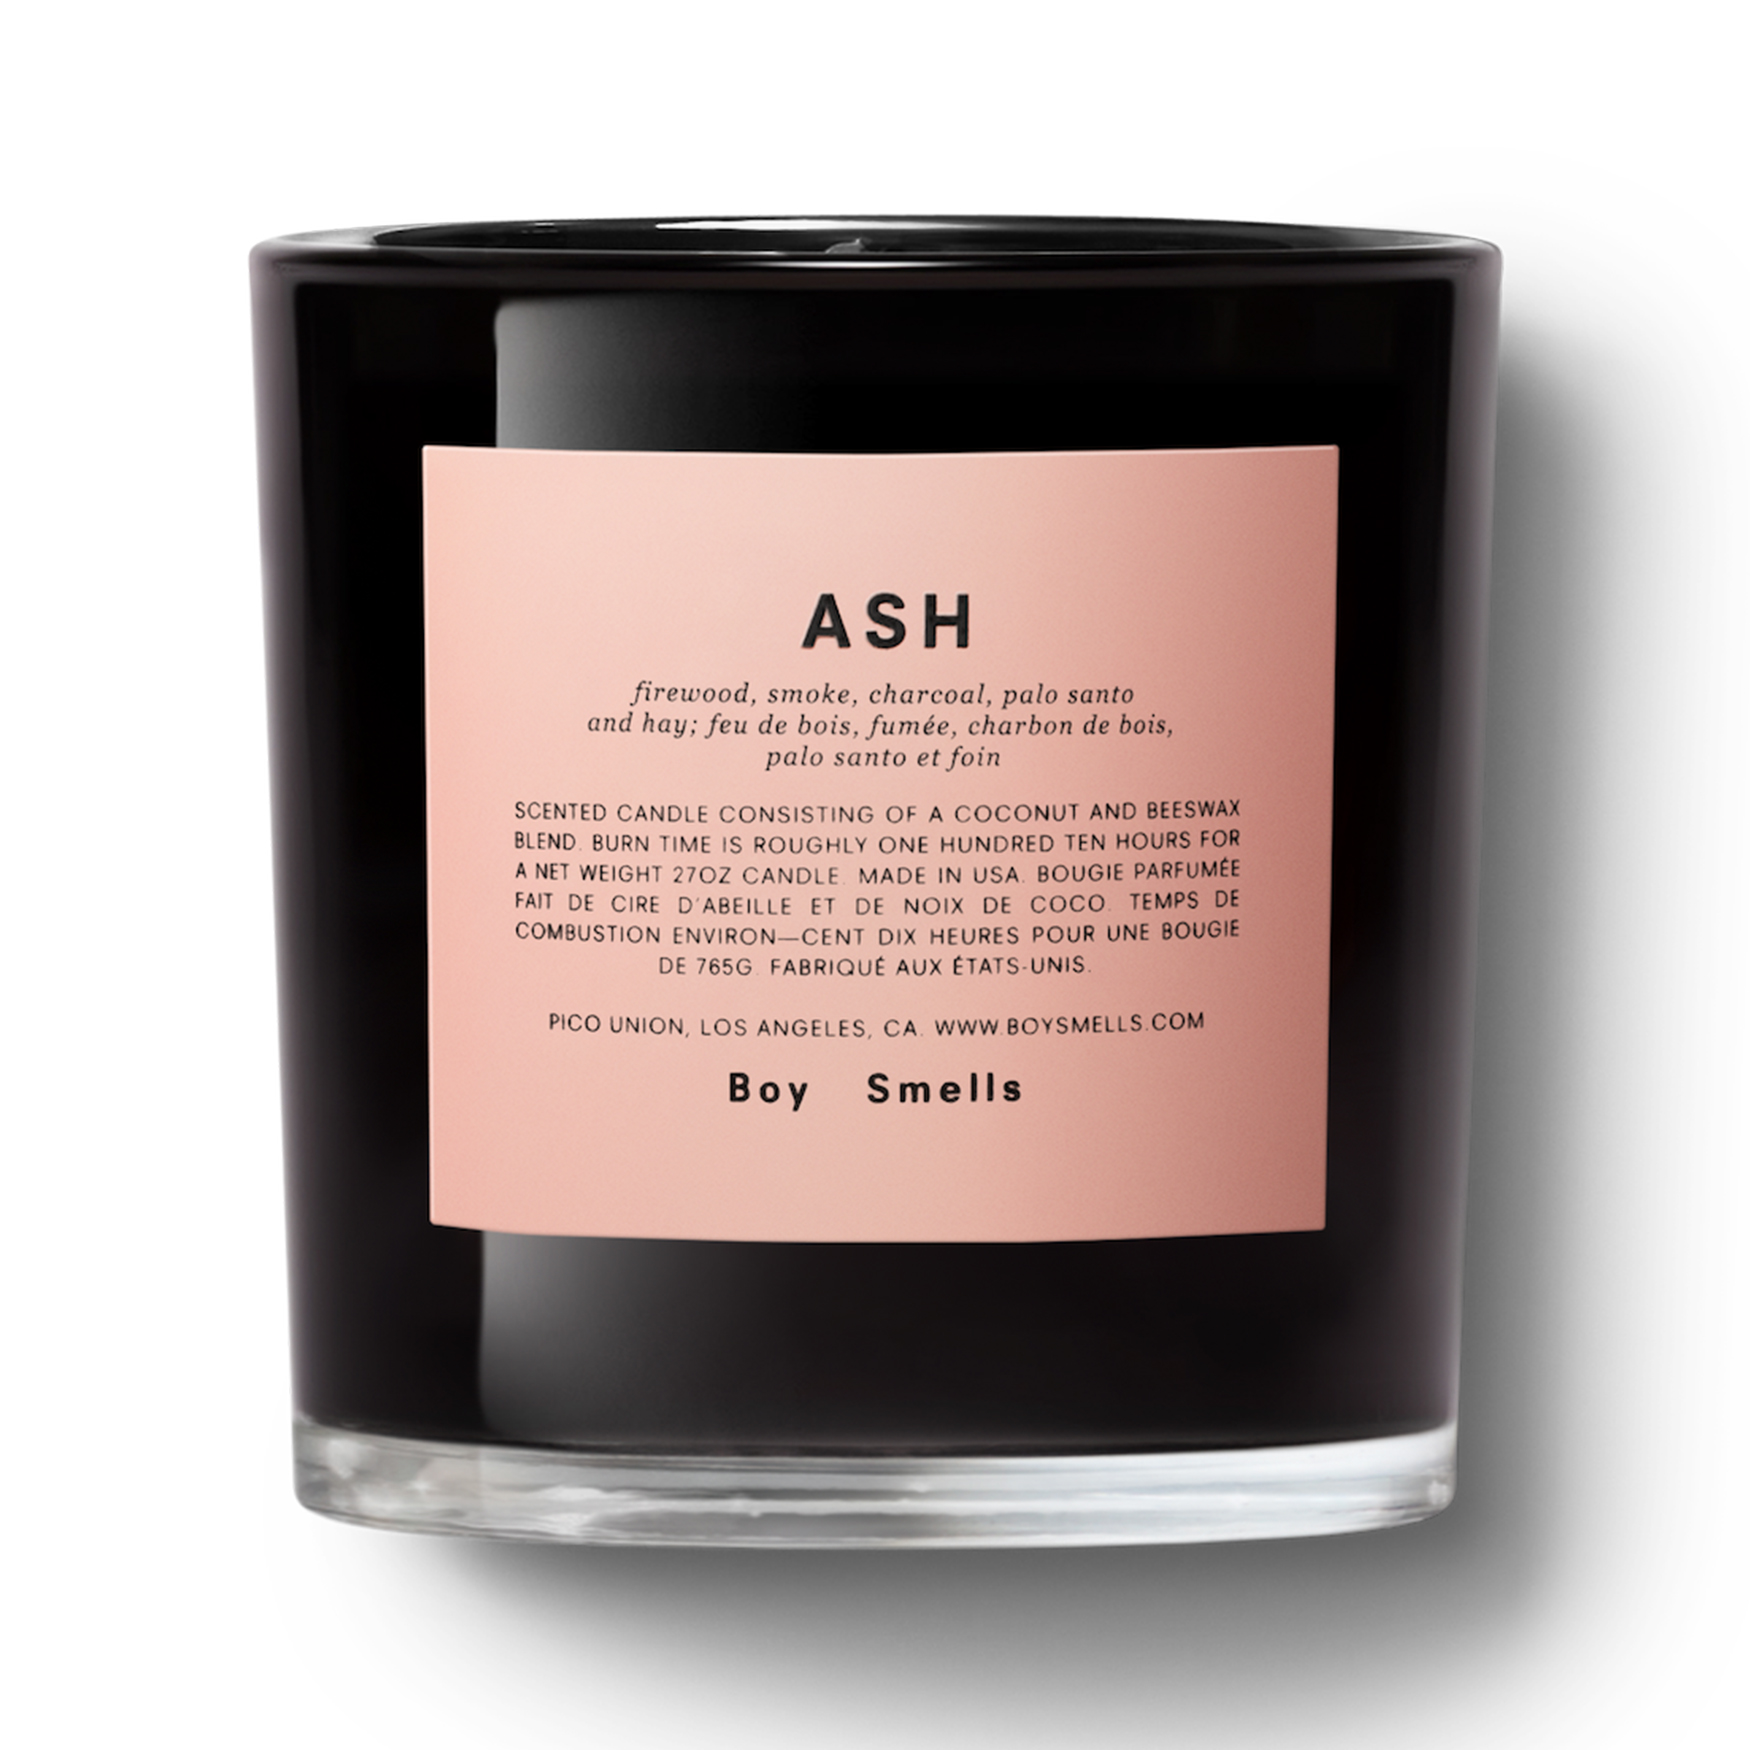 Boy Smells Ash Magnum Scented Candle | Space NK